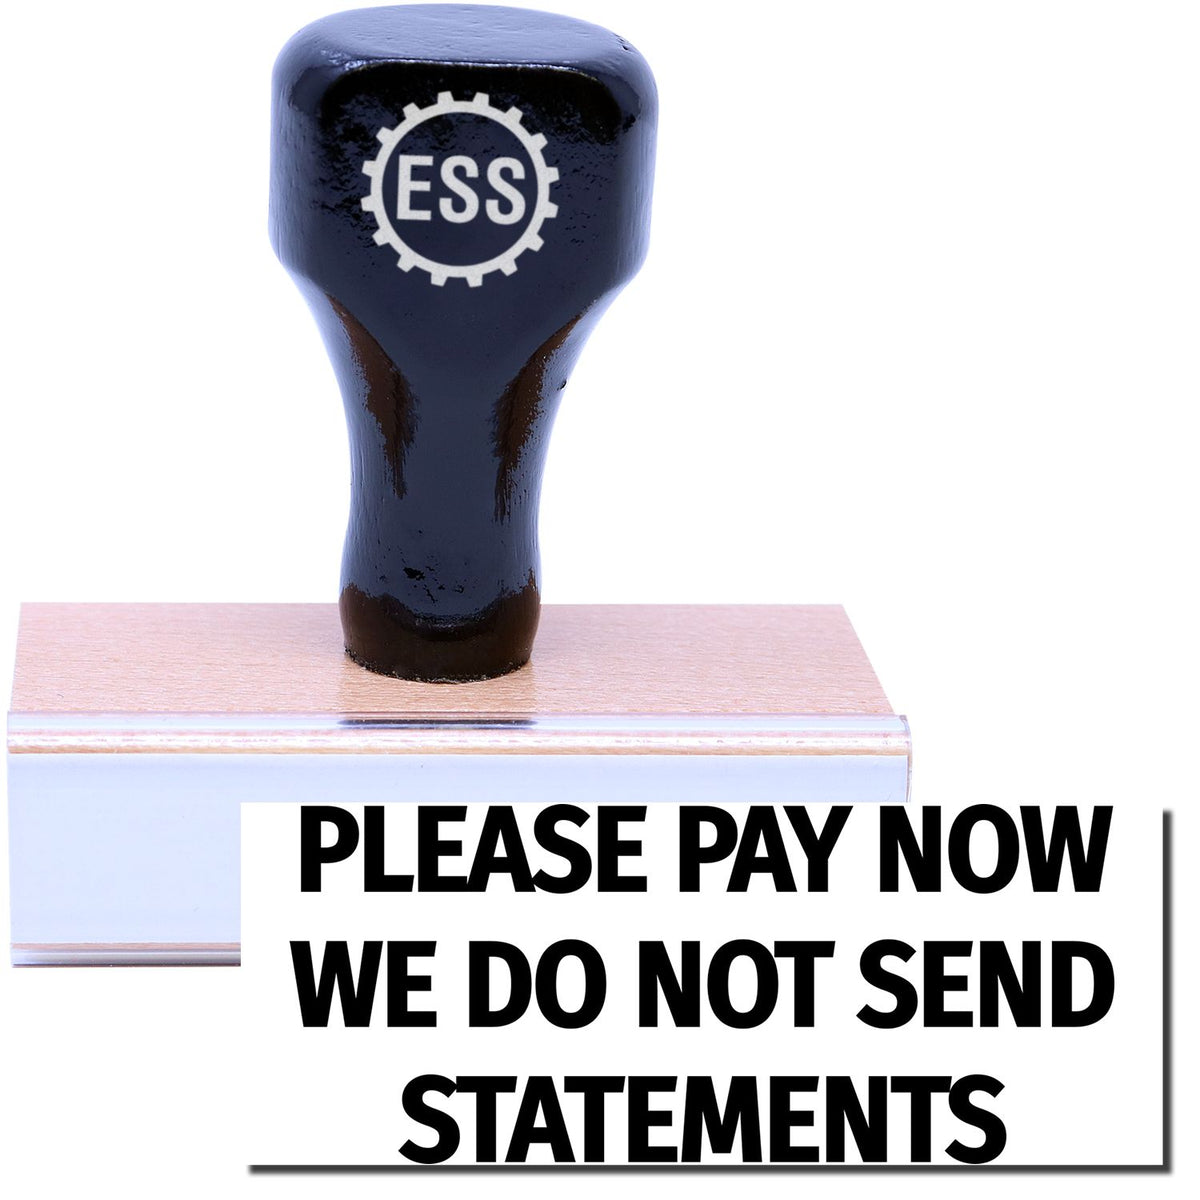 A stock office rubber stamp with a stamped image showing how the texts &quot;PLEASE PAY NOW&quot; and &quot;WE DO NOT SEND STATEMENTS&quot; are displayed after stamping.